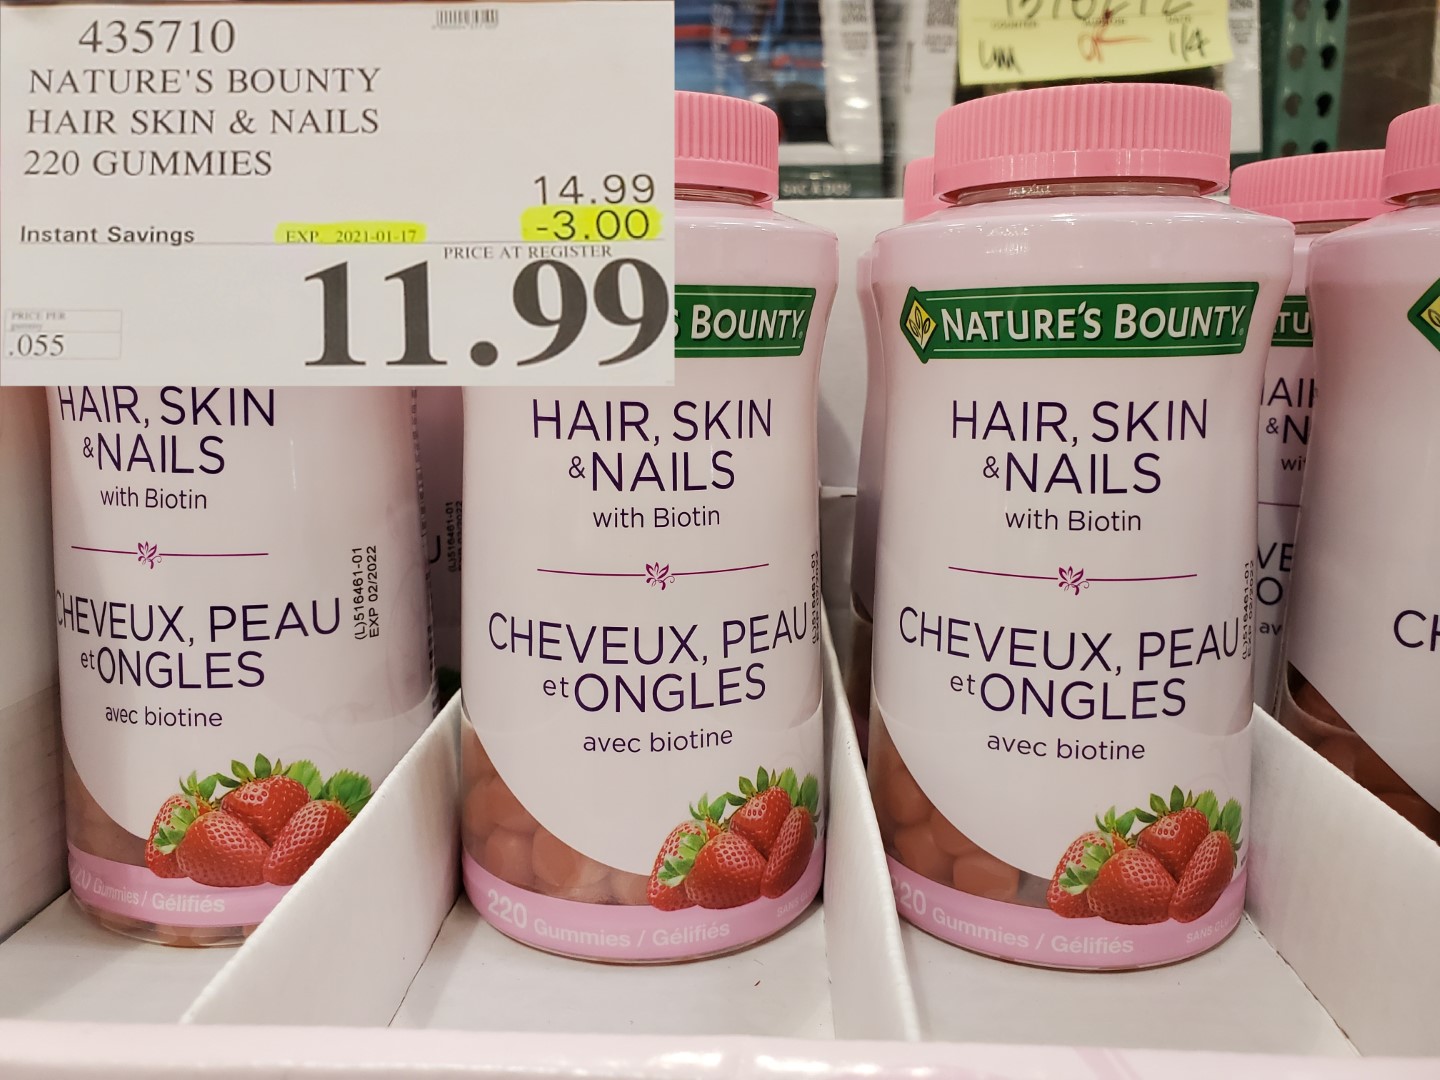 435710 NATURE S BOUNTY HAIR SKIN NAILS 220 GUMMIES 3 00 INSTANT SAVINGS  EXPIRES ON 2021 01 17 11 99 - Costco East Fan Blog